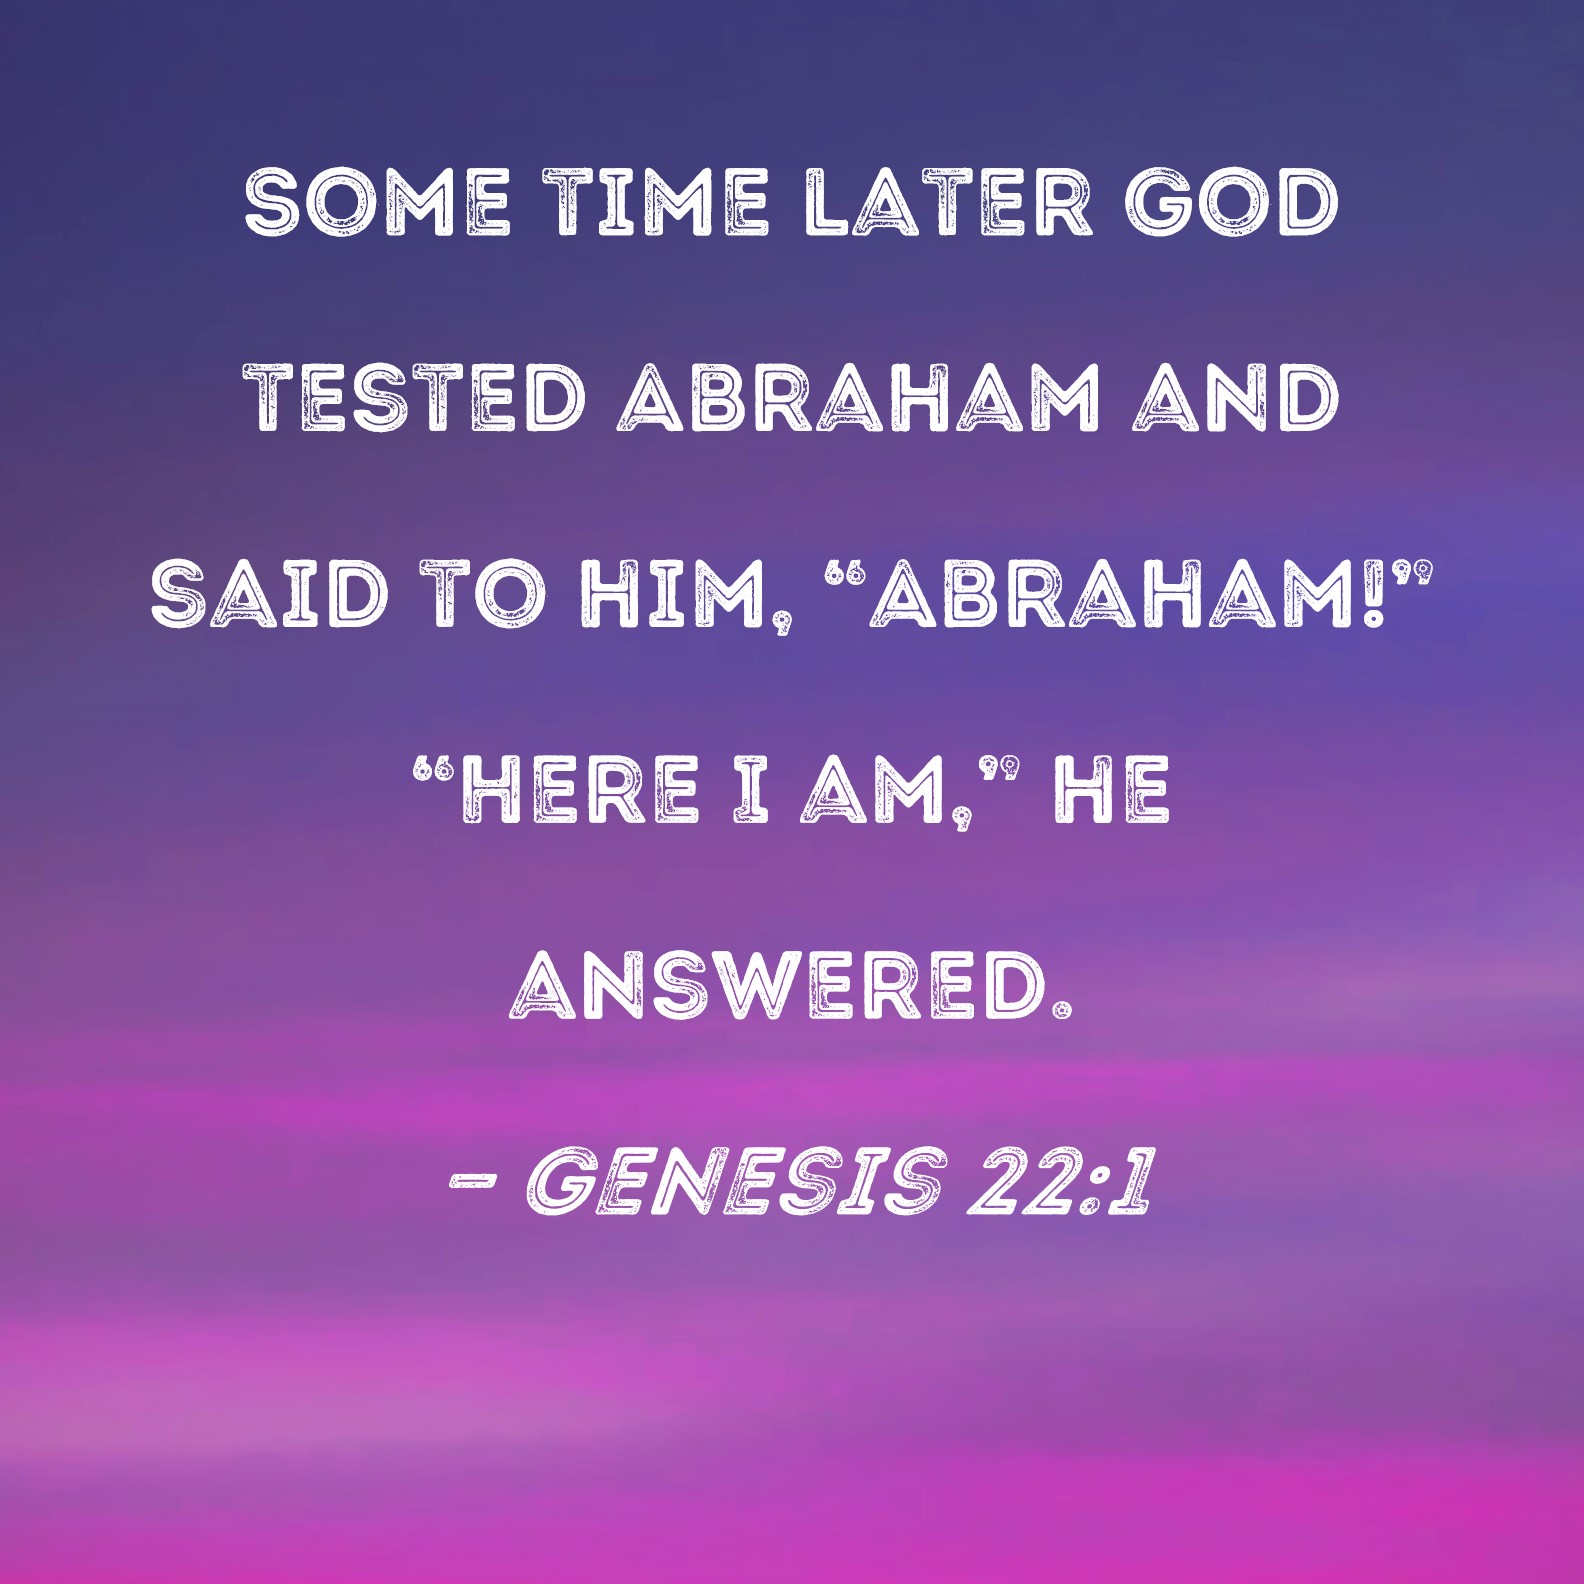 Genesis 22:1 Some time later God tested Abraham and said to him, "Abraham!"  "Here I am," he answered.